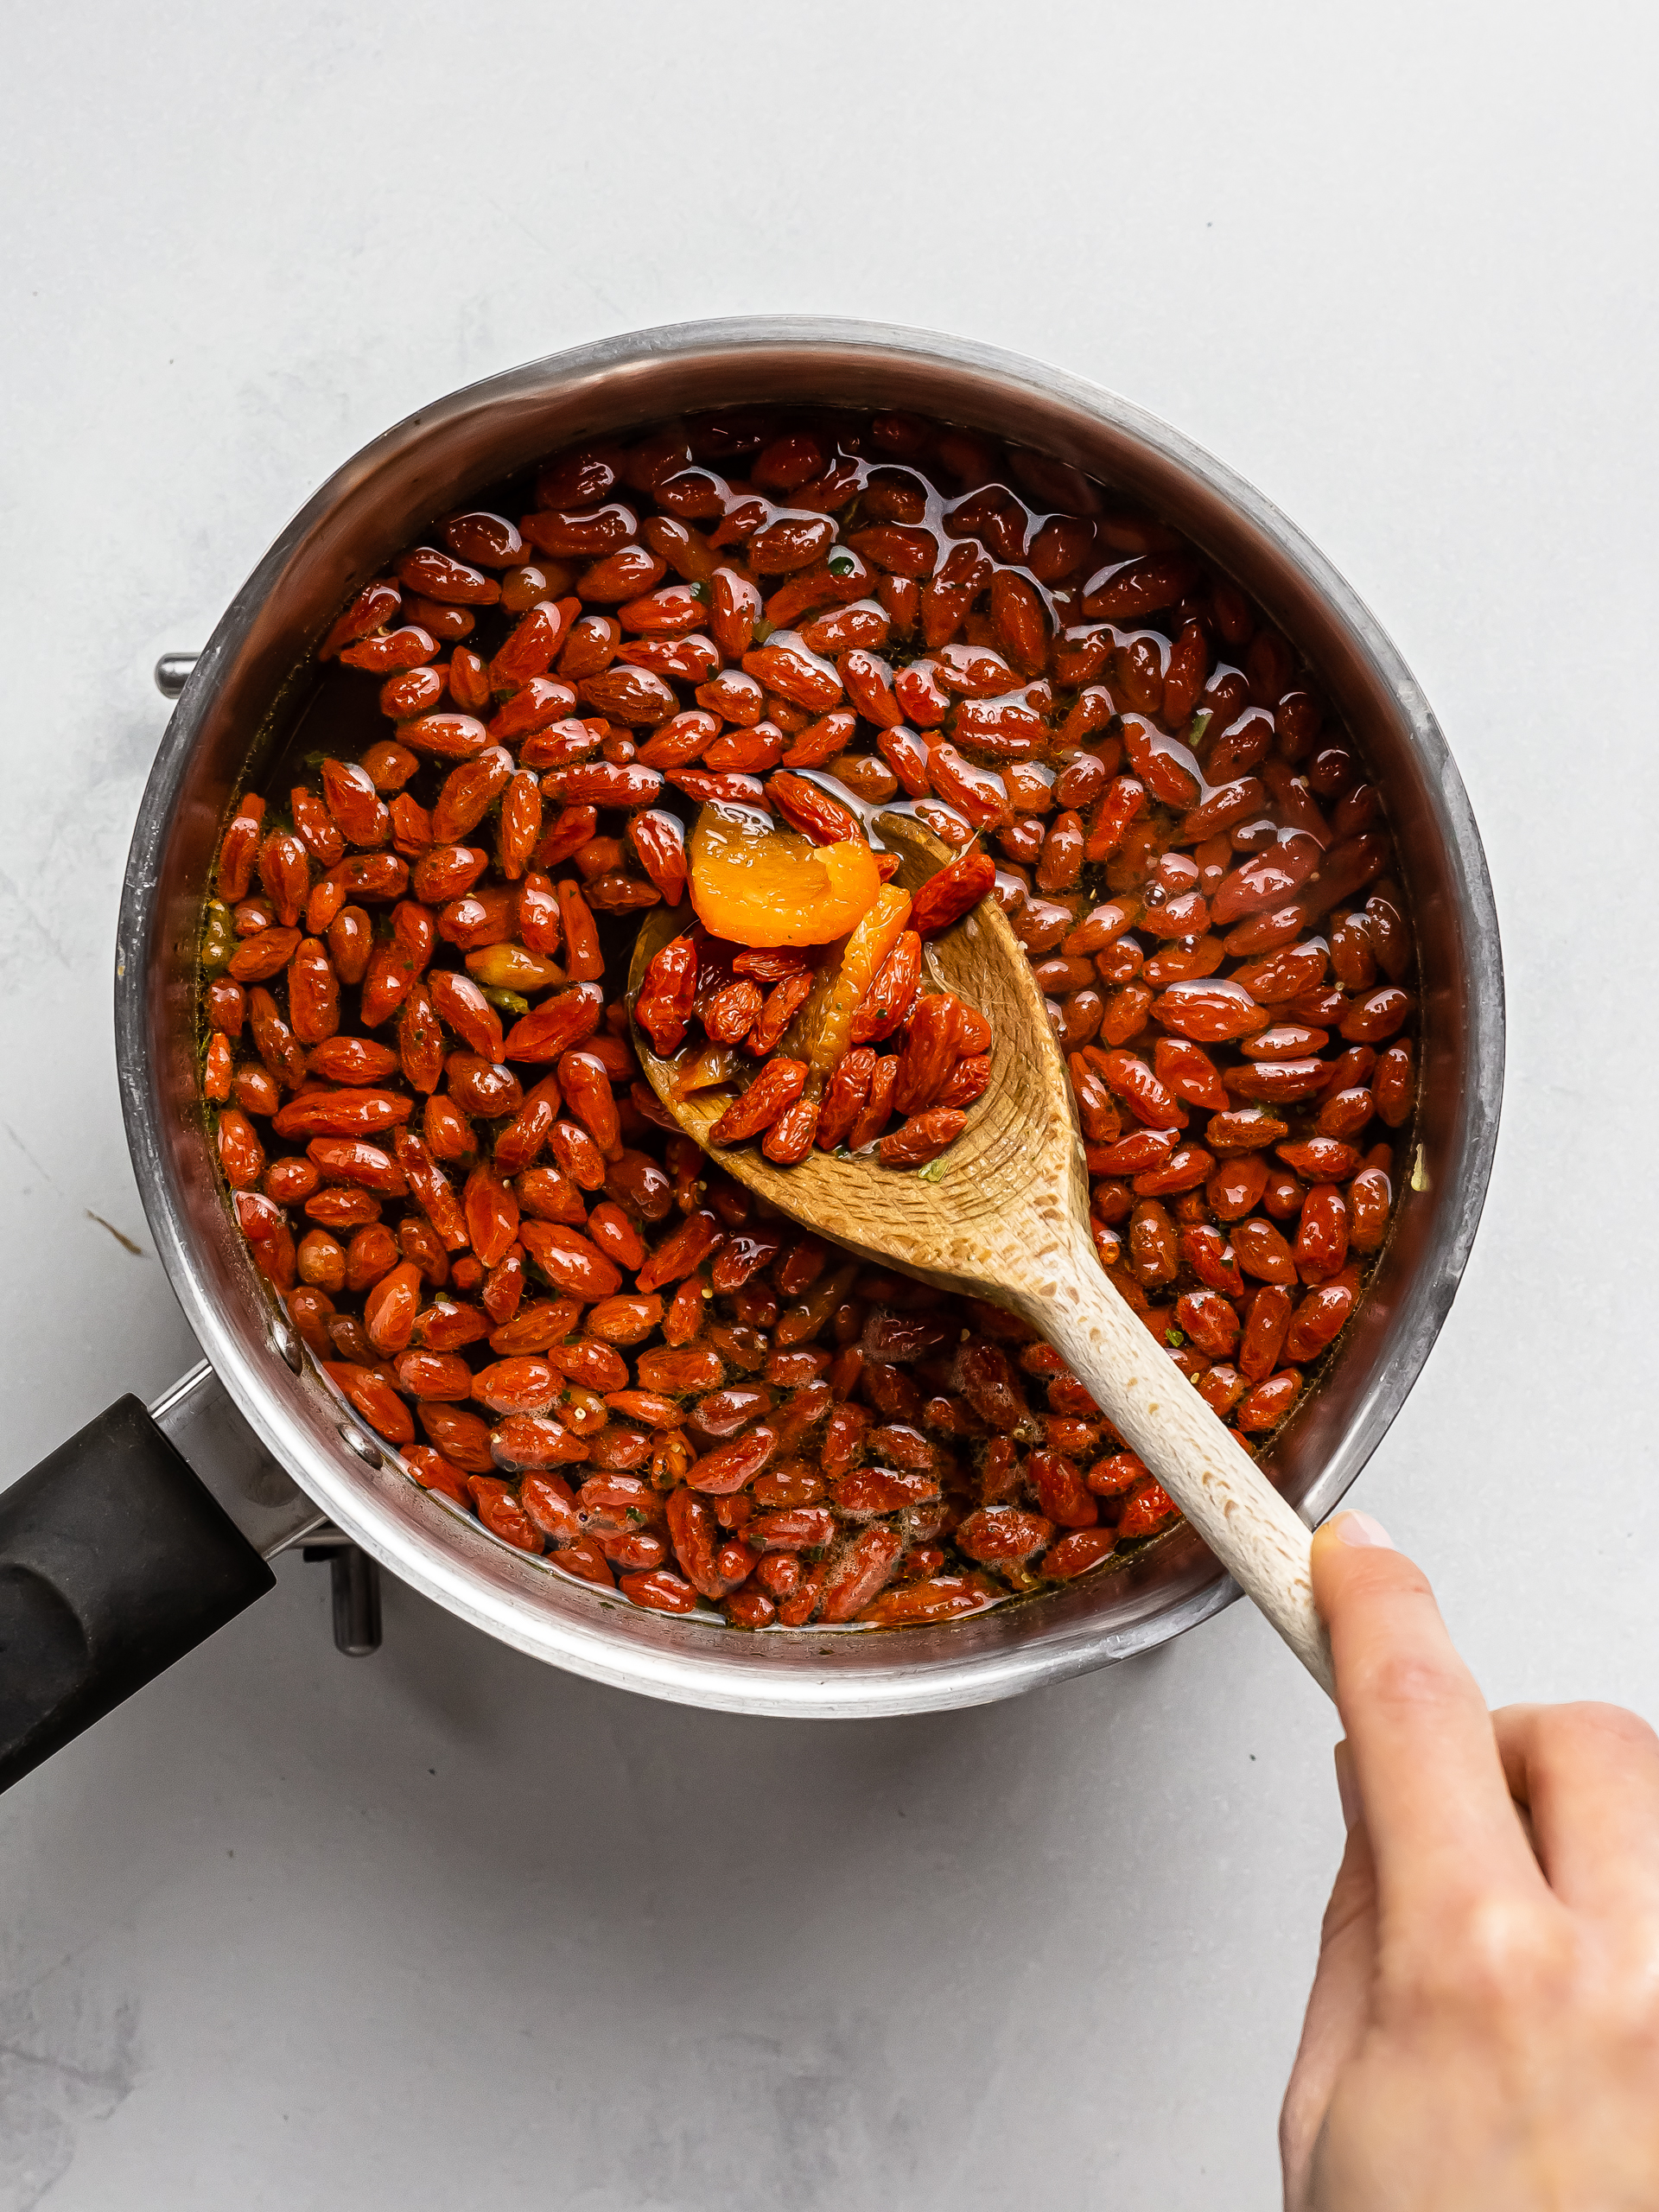 goji berries cooking in a soup